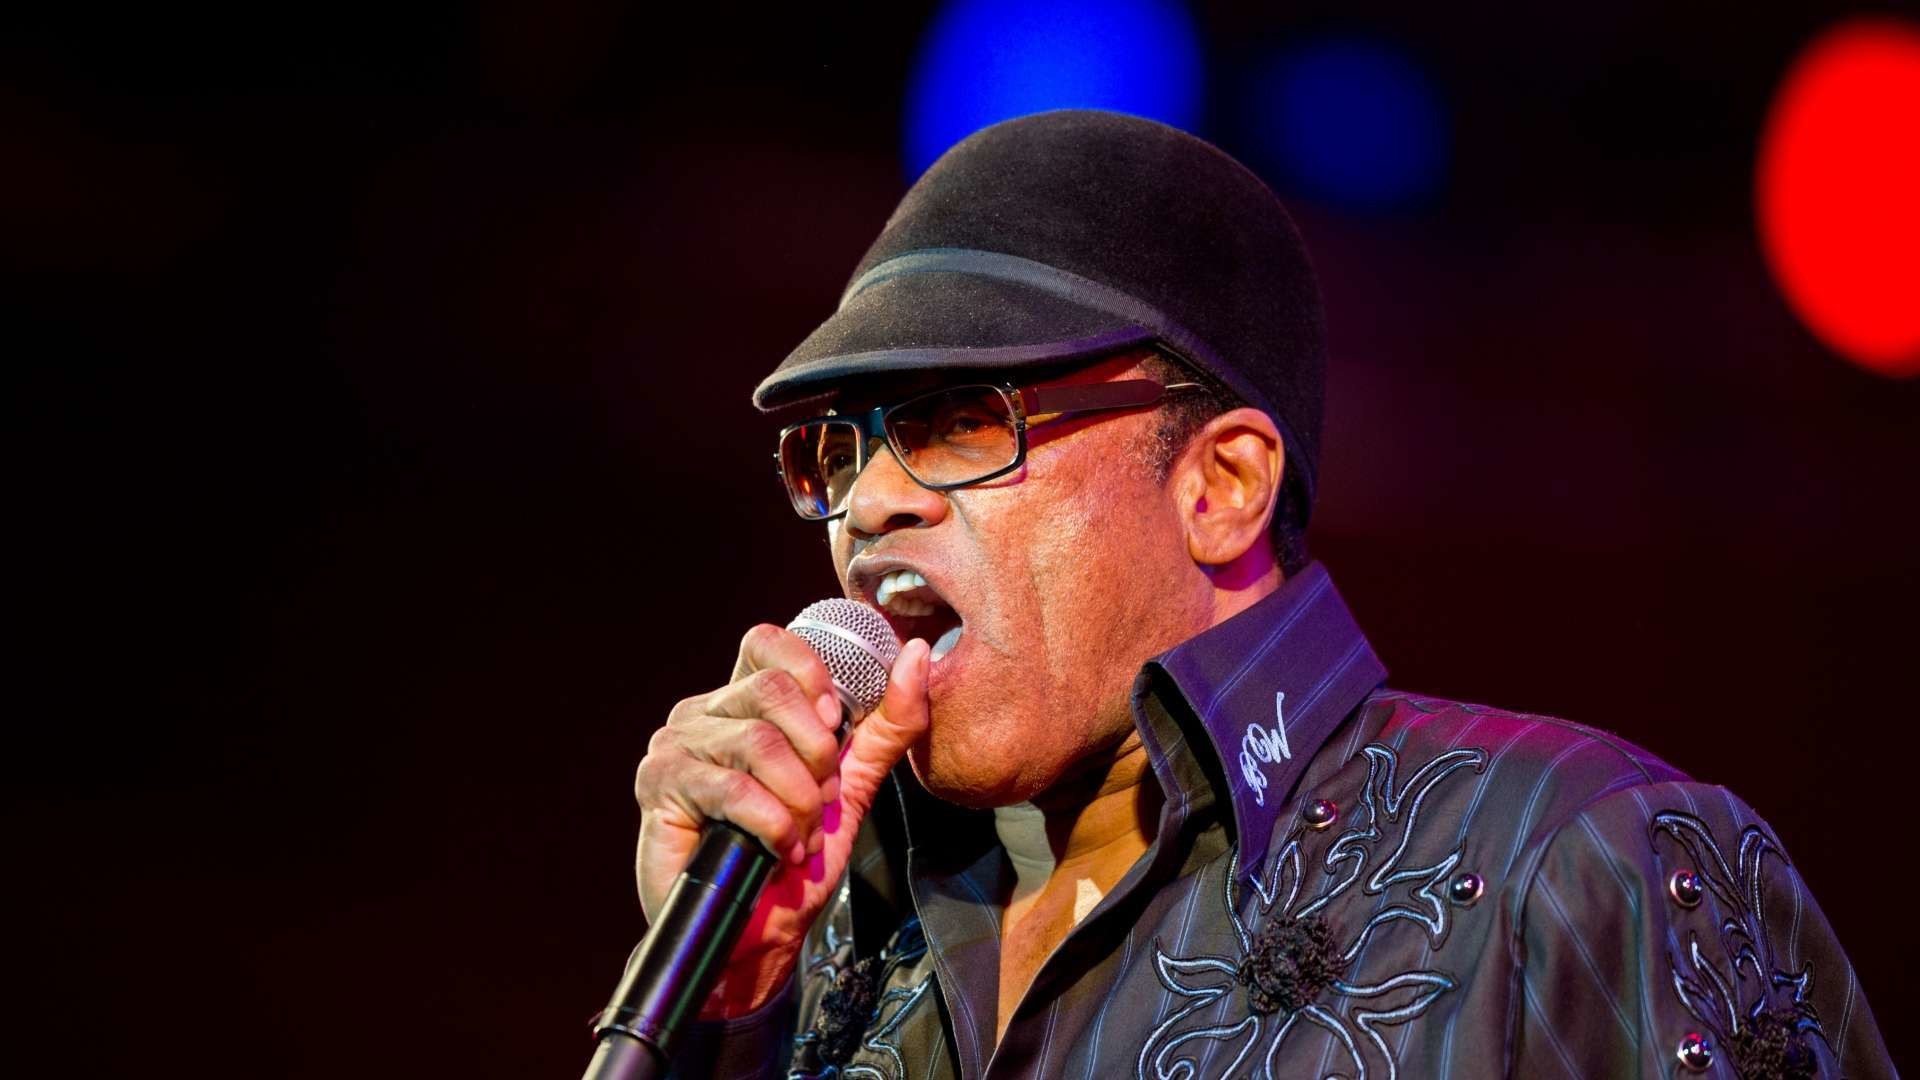 1920x1080 African American Wallpaper Bobby womack african american